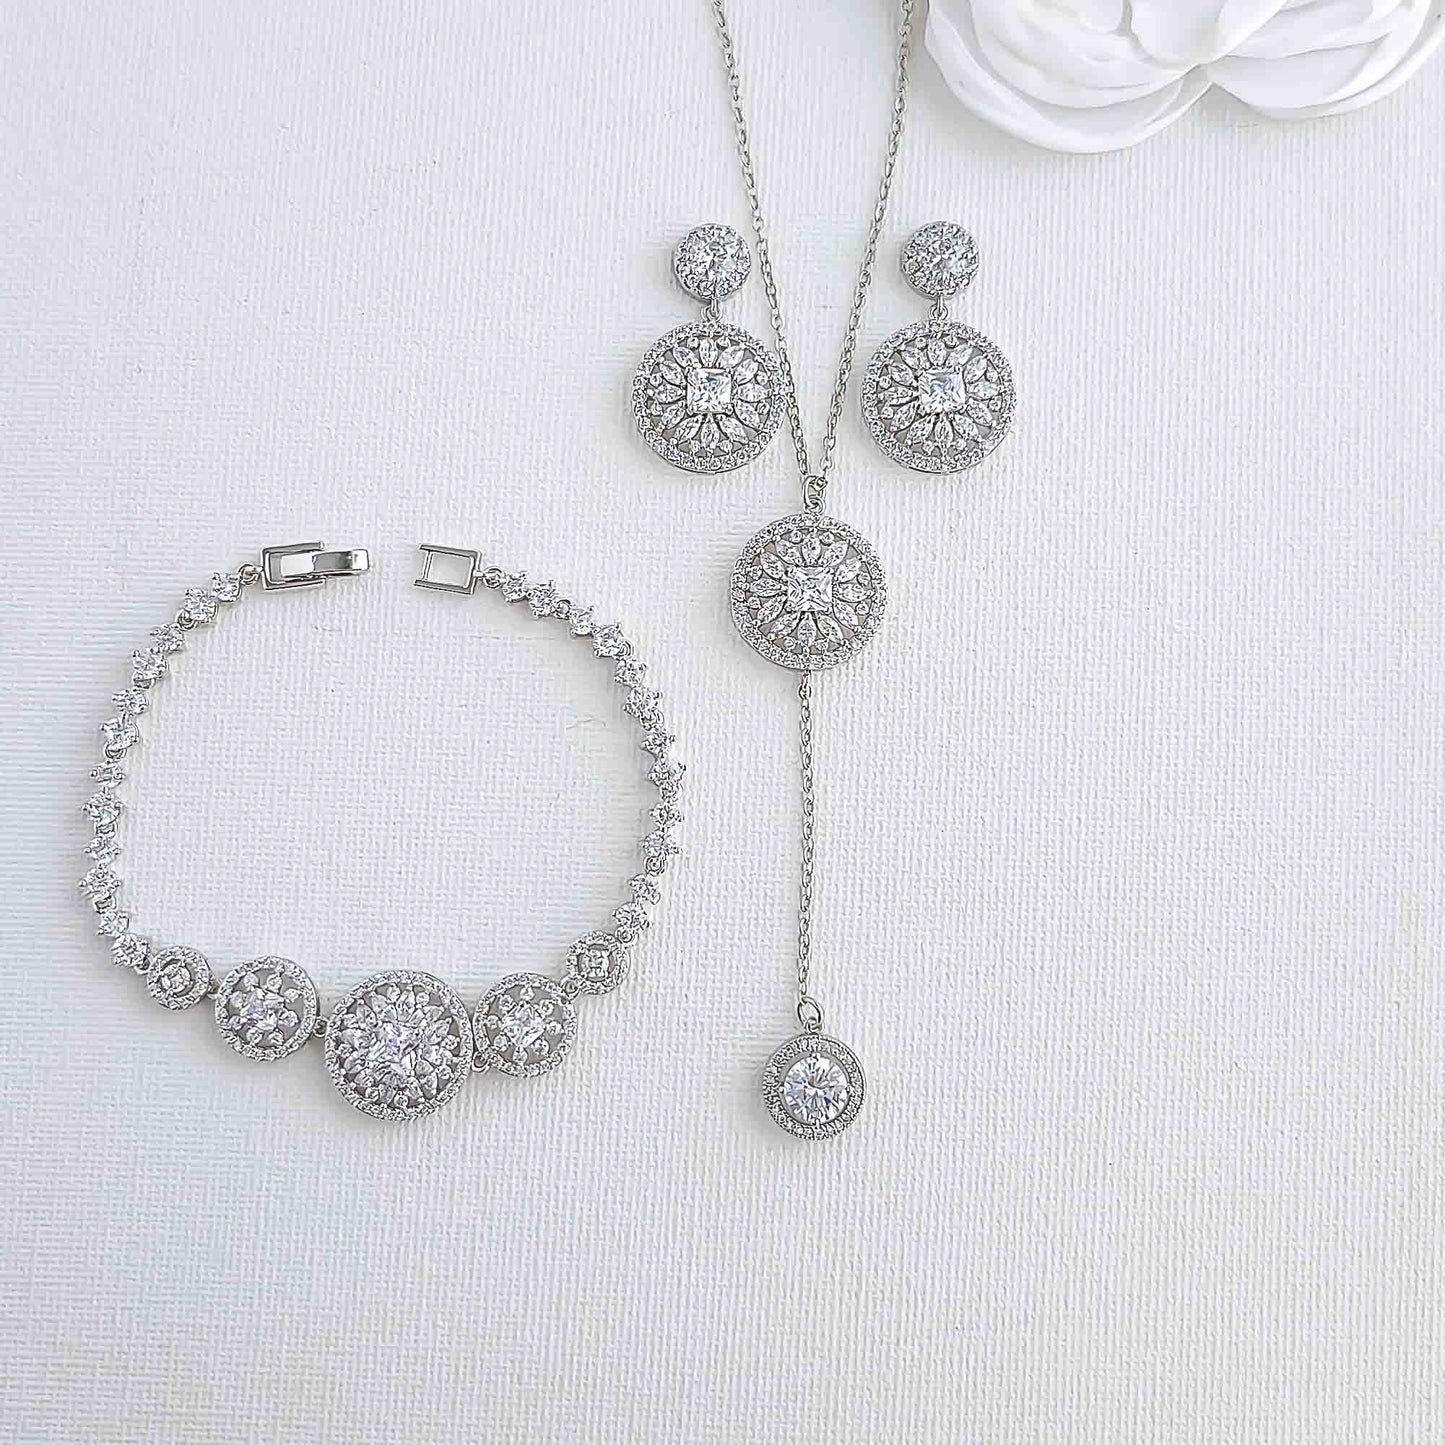 Earrings Bracelet and Long Drop Necklace Set for Weddings- Adonia